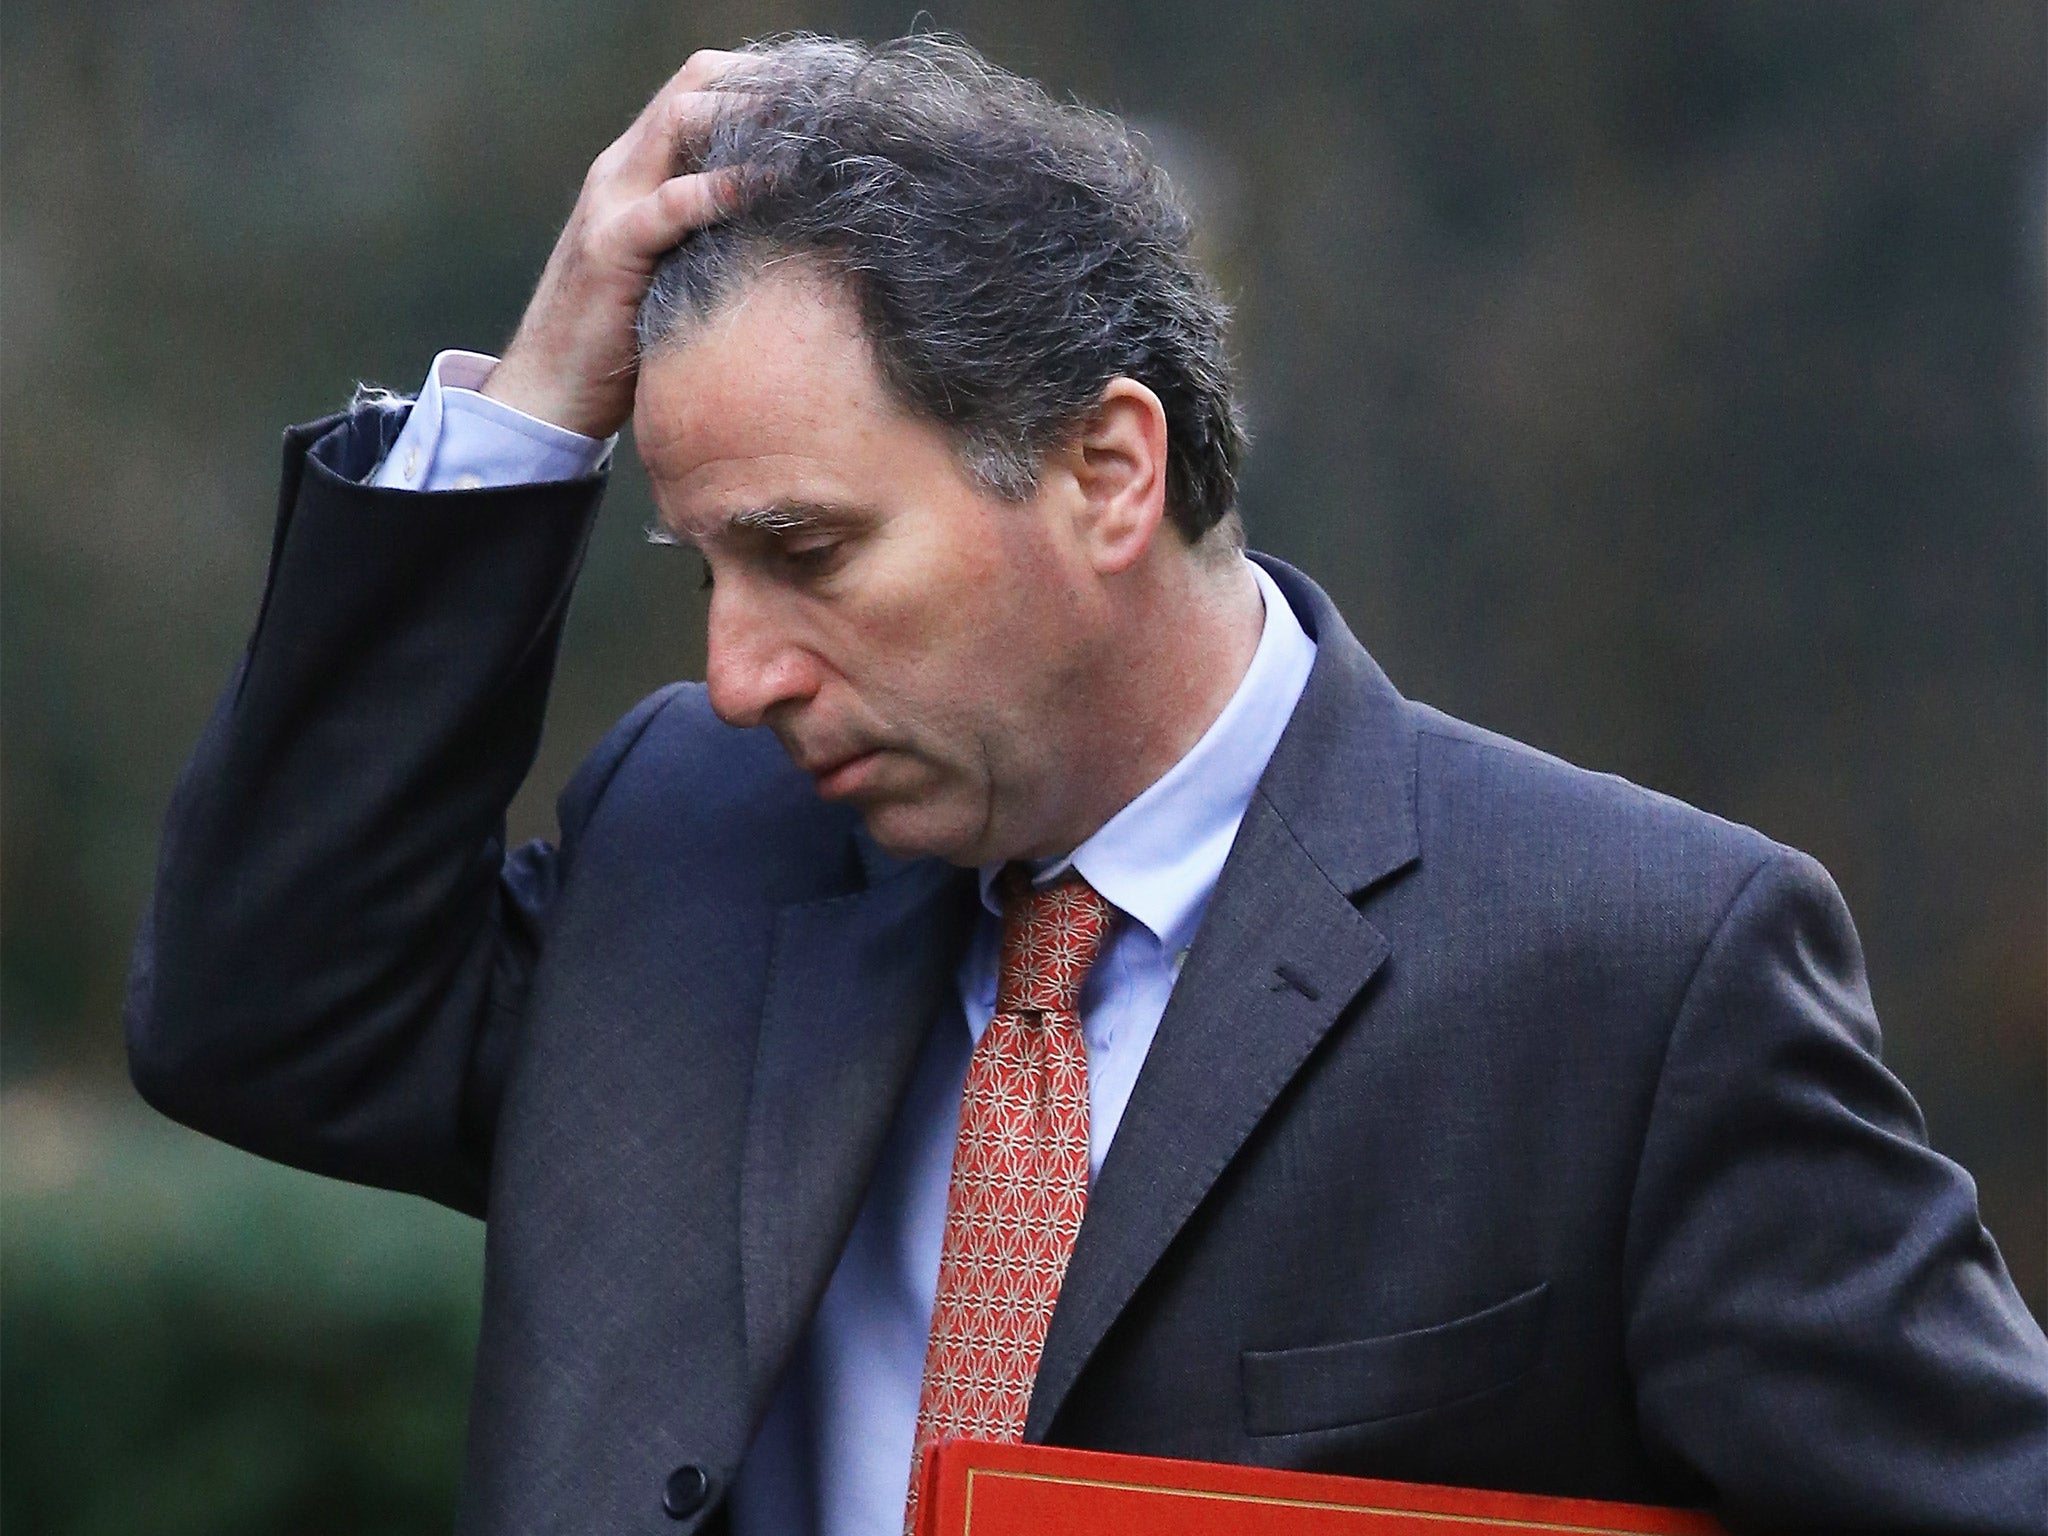 Oliver Letwin blamed 'bad moral attitudes' for unrest in mainly black inner-city areas